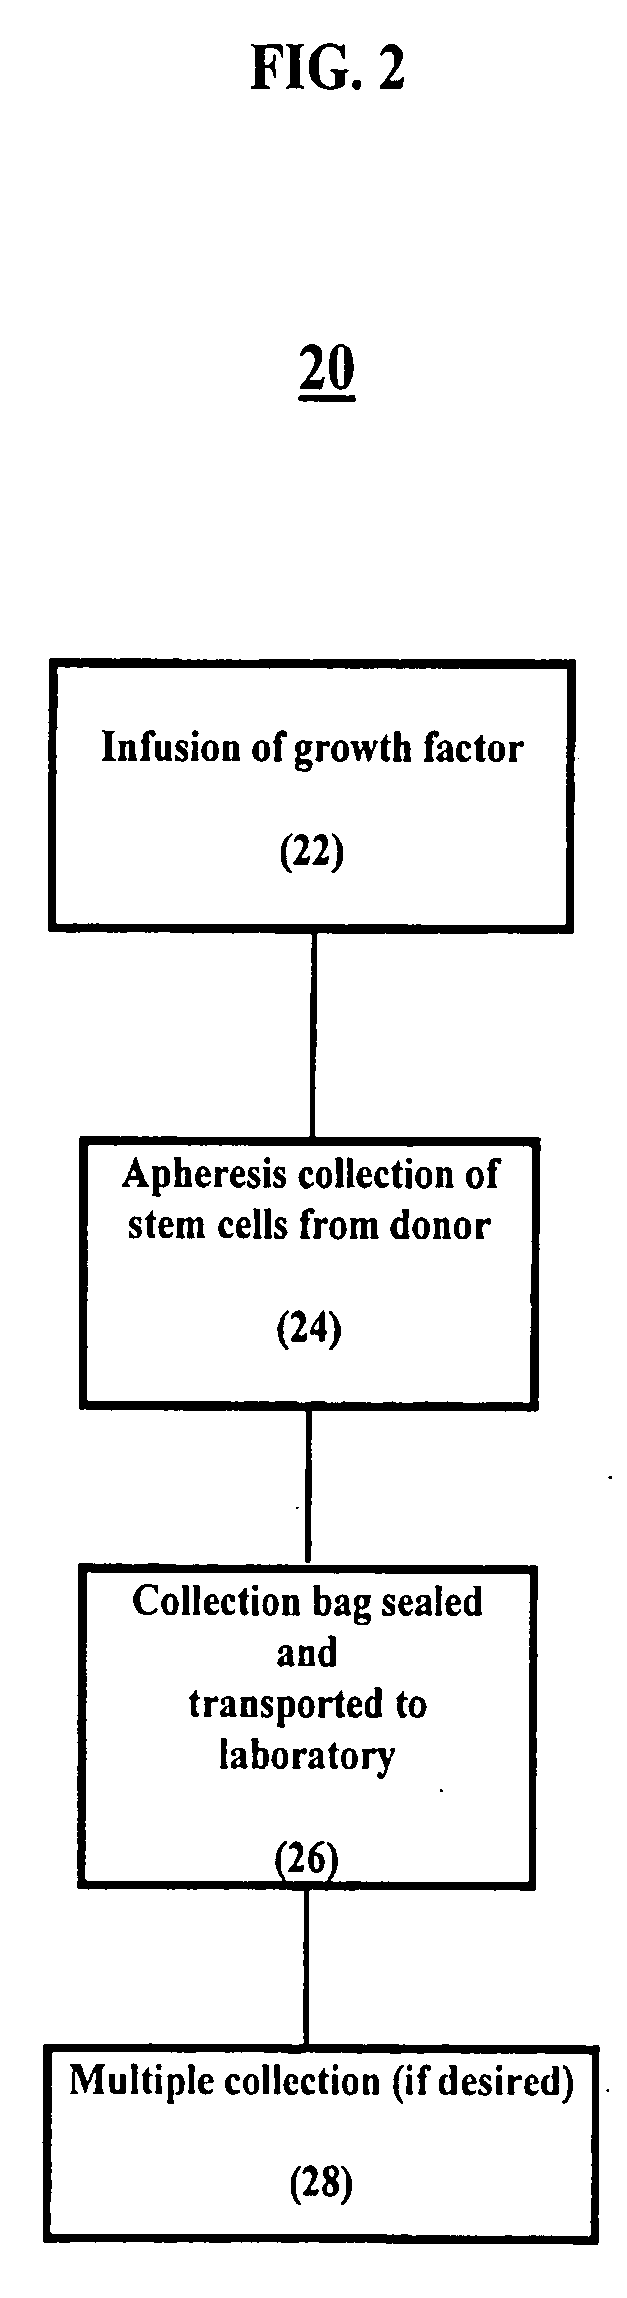 Elective collection and banking of autologous peripheral blood stem cells